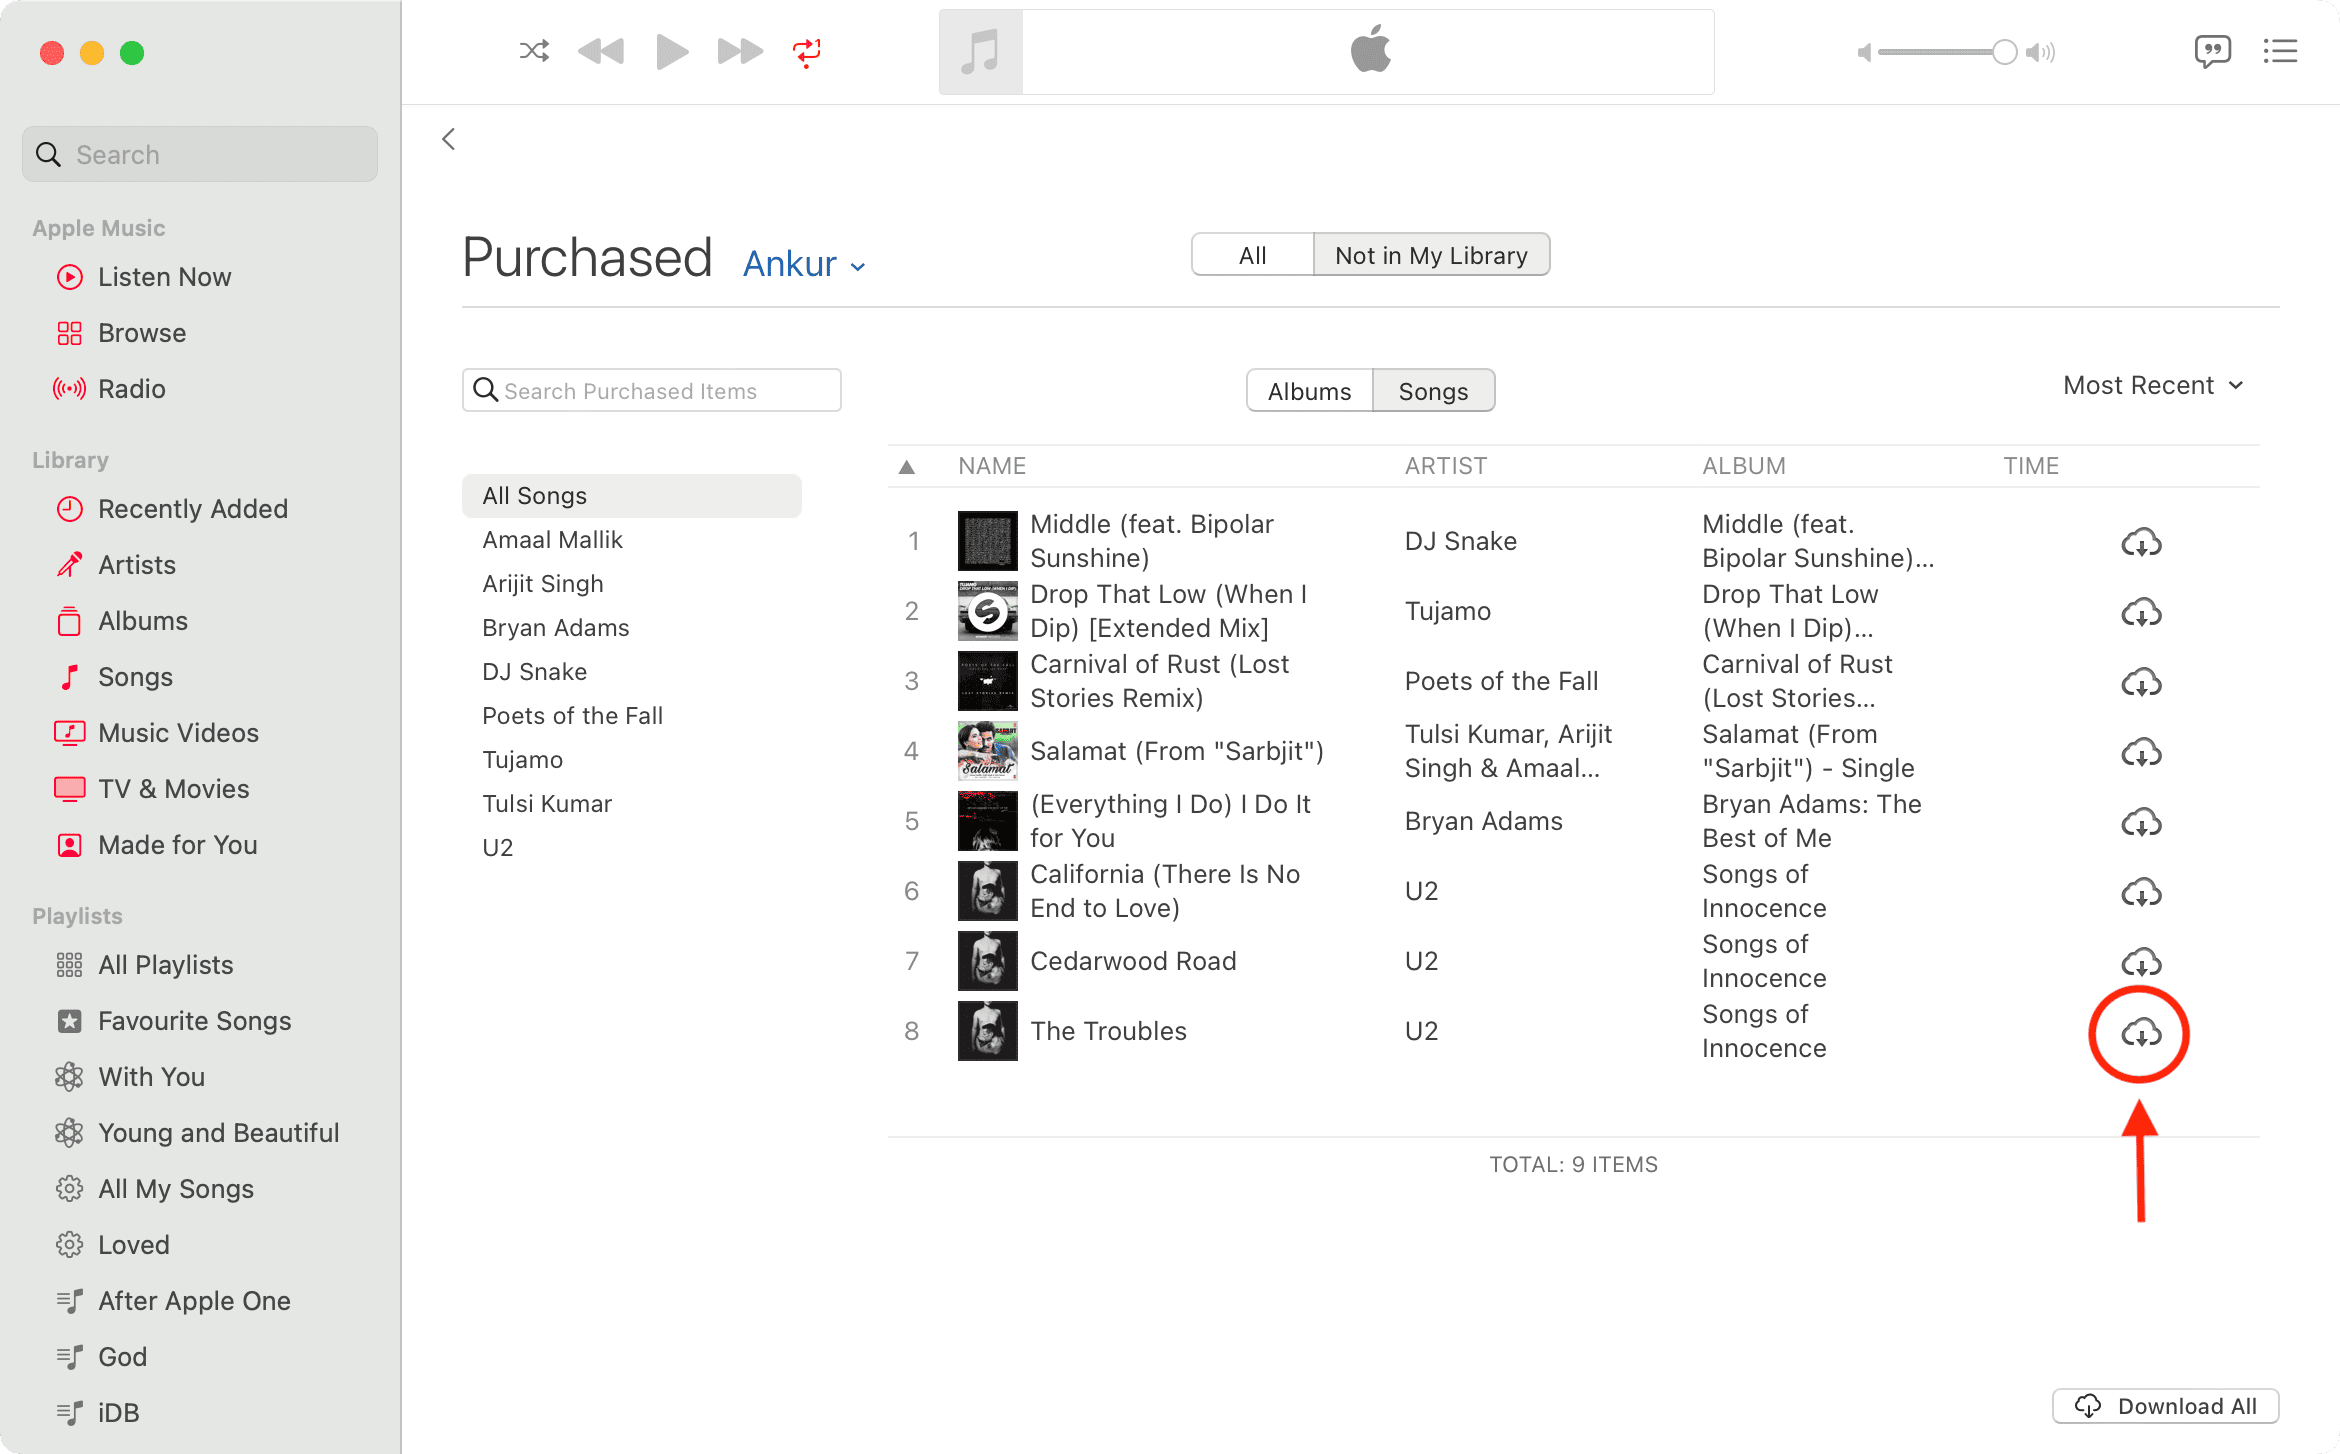 Selectively download songs from list of previously purchased items